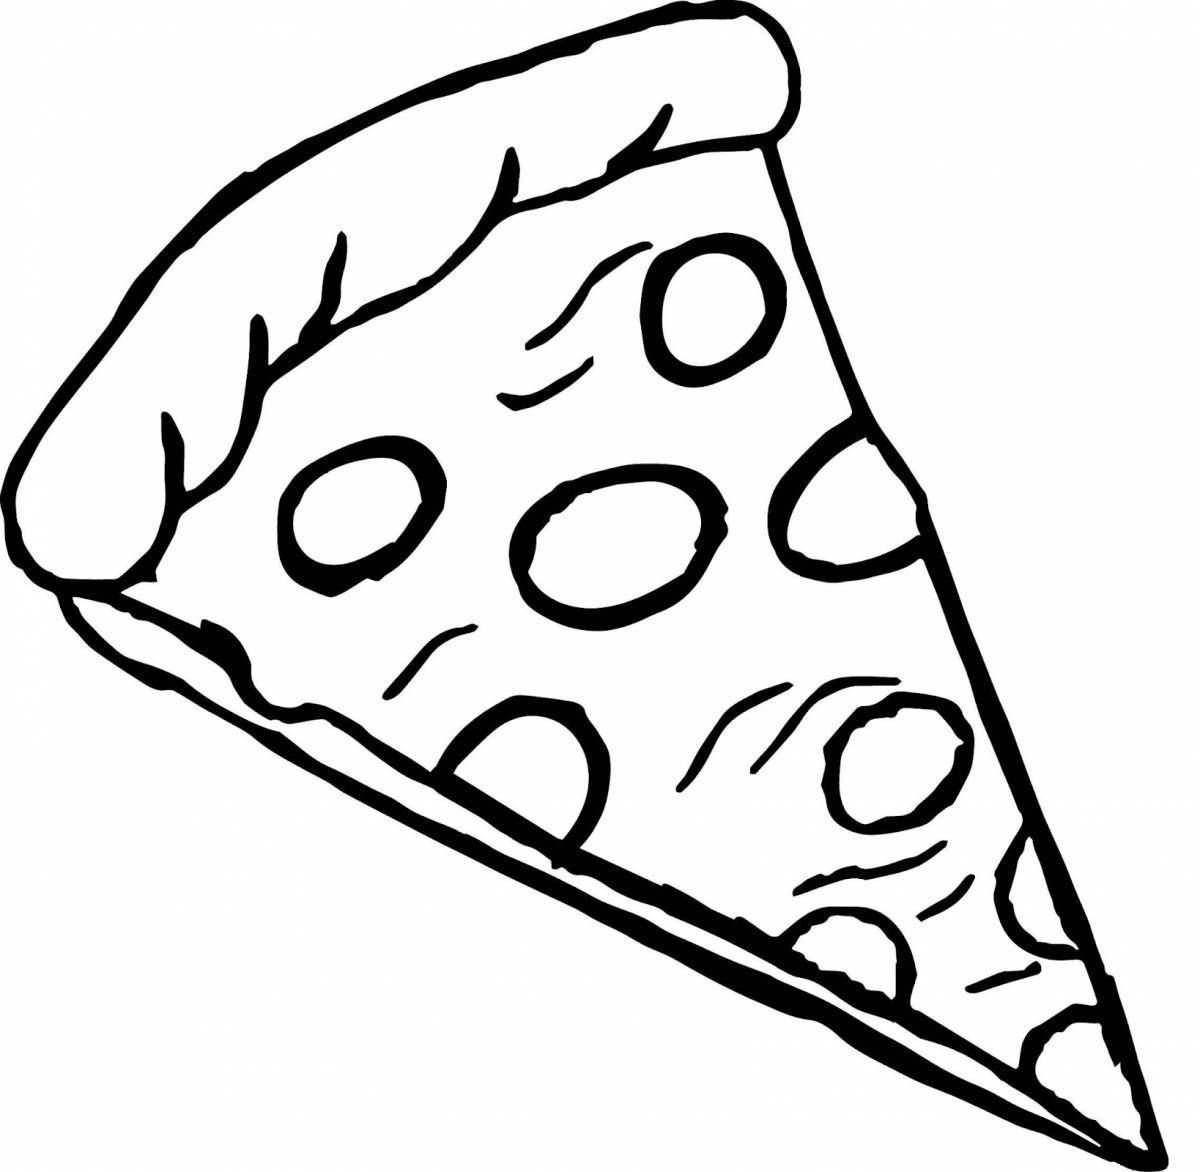 Ambrosial pizza slice coloring page